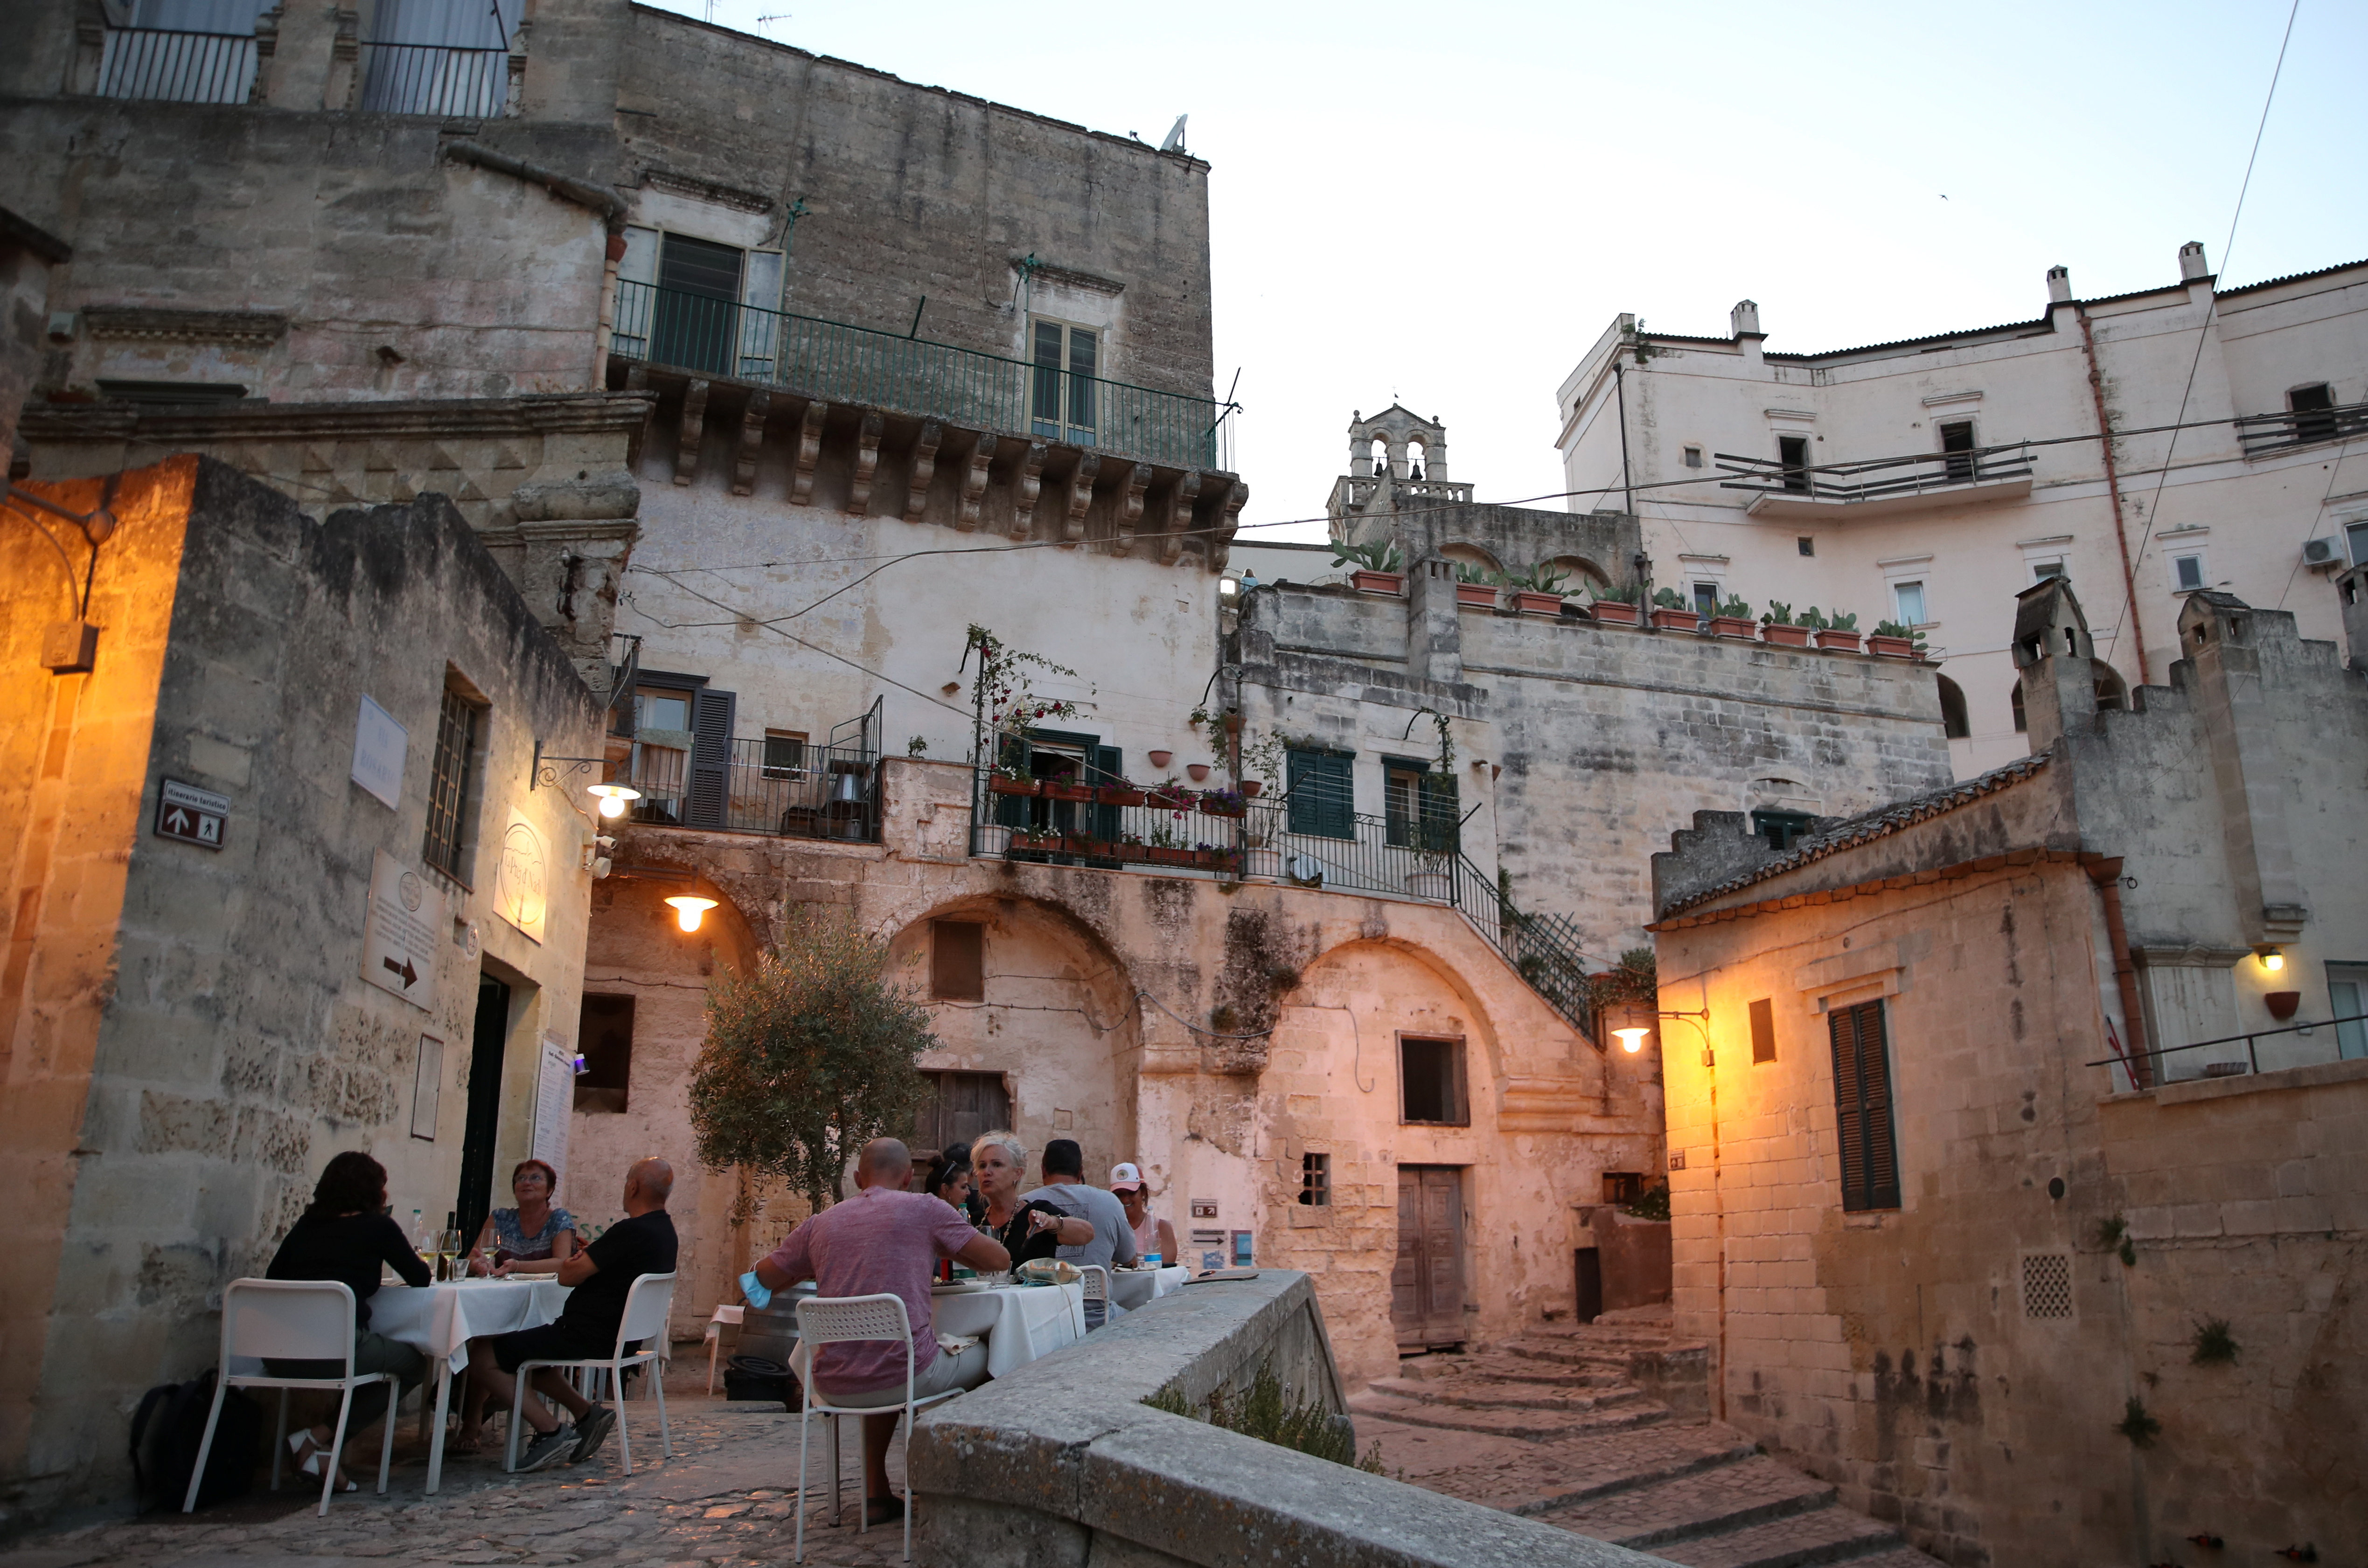 People enjoy the evening at a restaurant in Matera, Italy